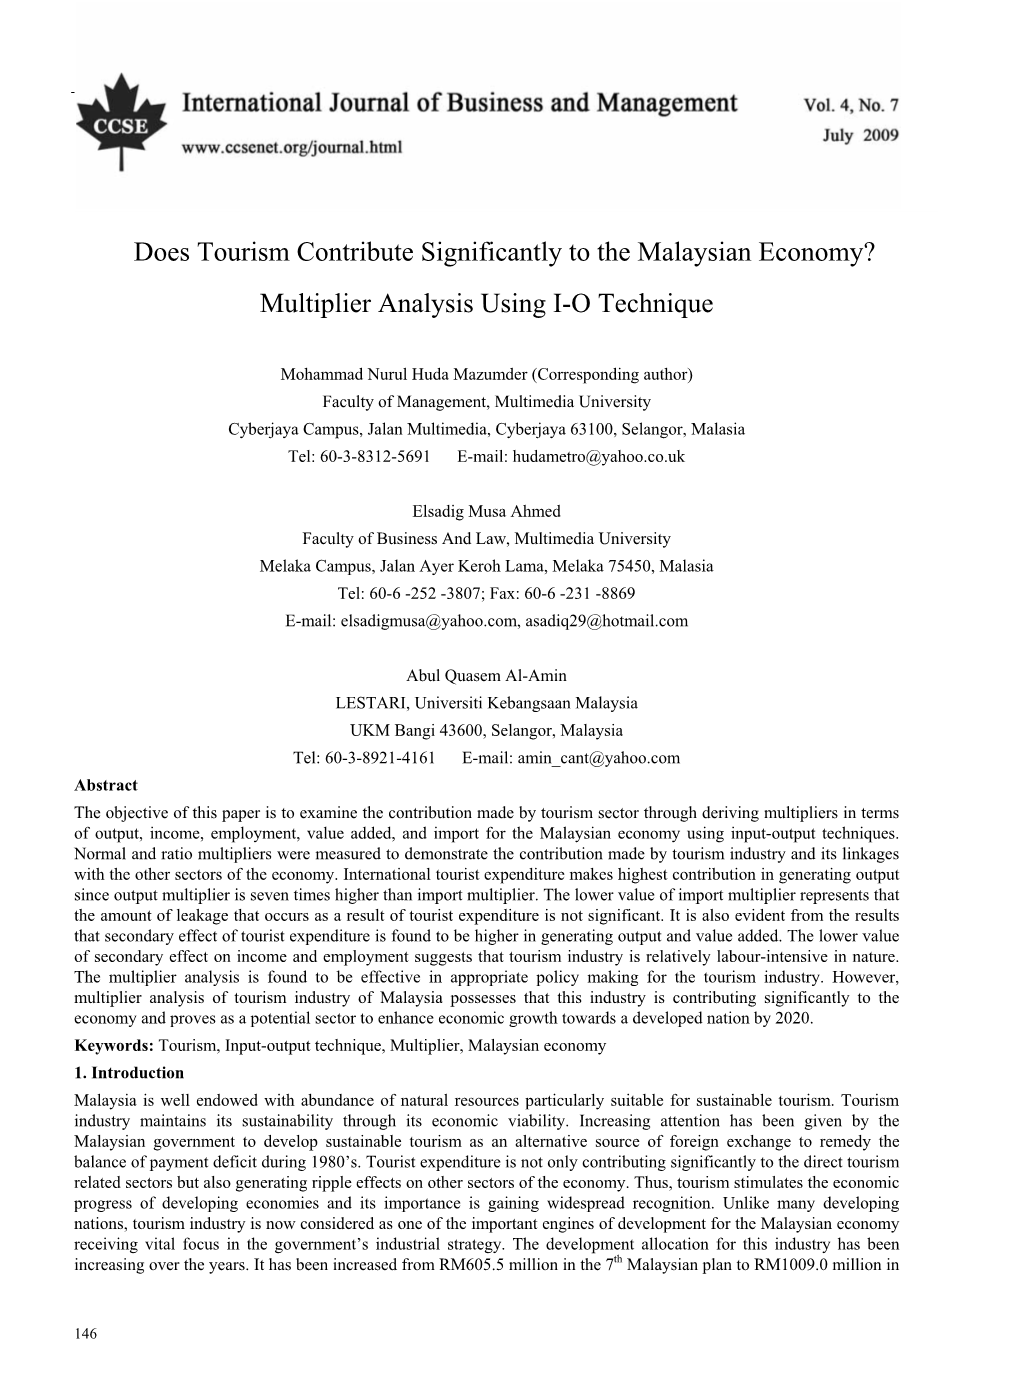 Does Tourism Contribute Significantly to the Malaysian Economy? Multiplier Analysis Using I-O Technique